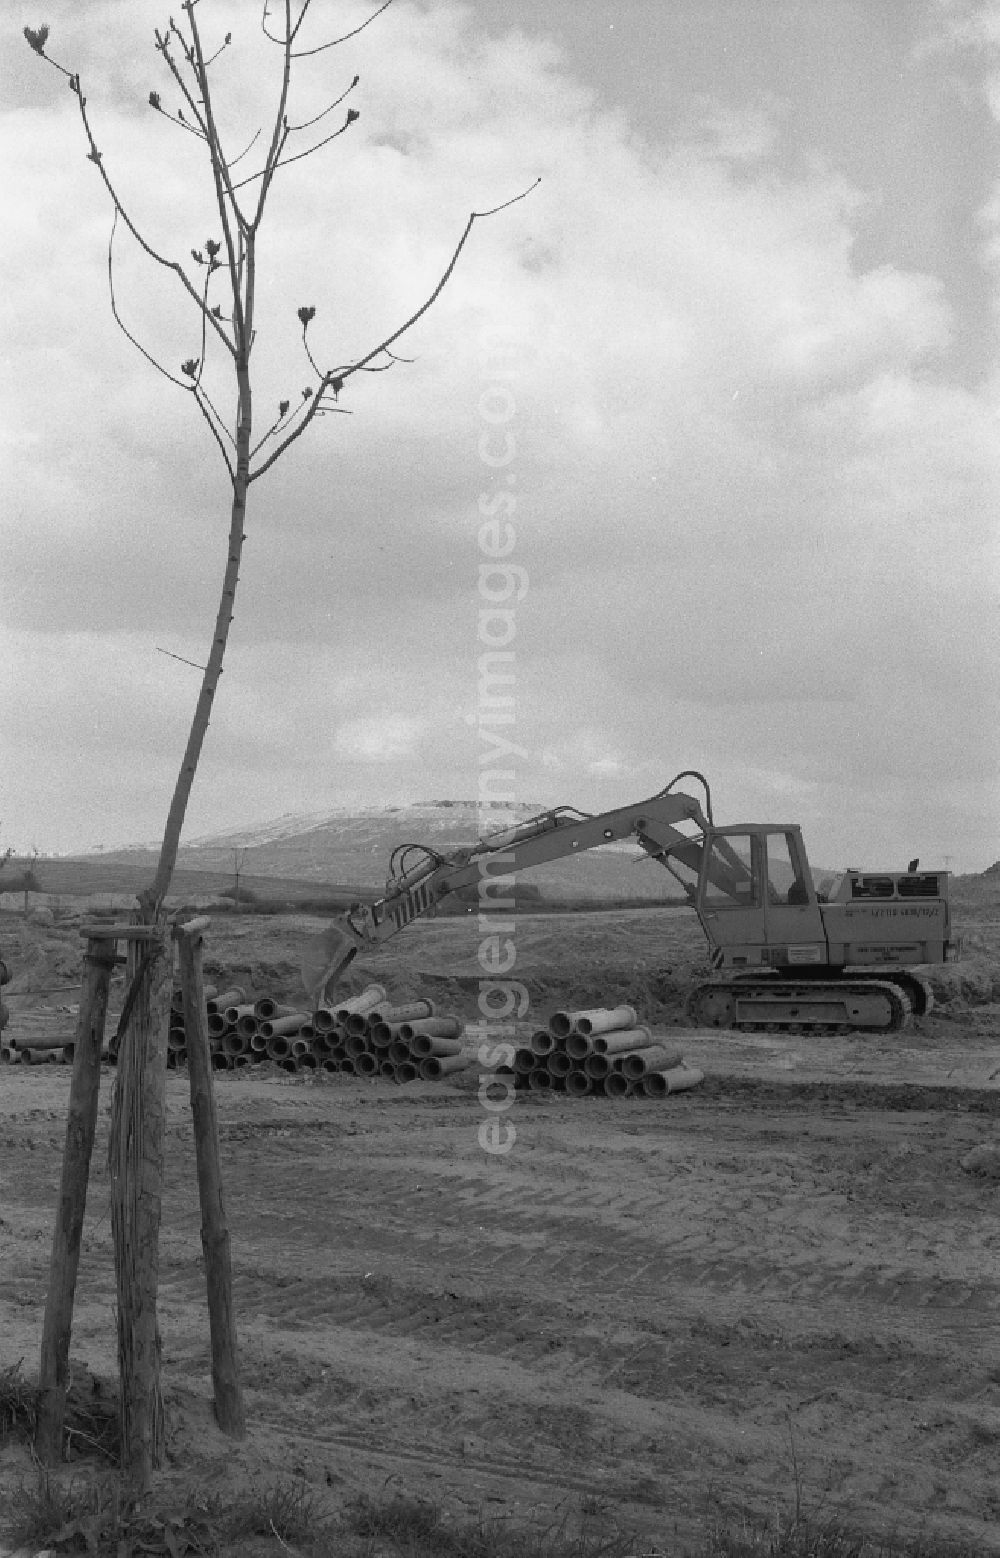 GDR image archive: Berlin - Earthworks construction site for civil engineering development on the Kienberg (formerly known as Marzahner Kippe, garbage dump or Hellersdorfer Berg) in the district of Marzahn in Berlin East Berlin on the territory of the former GDR, German Democratic Republic